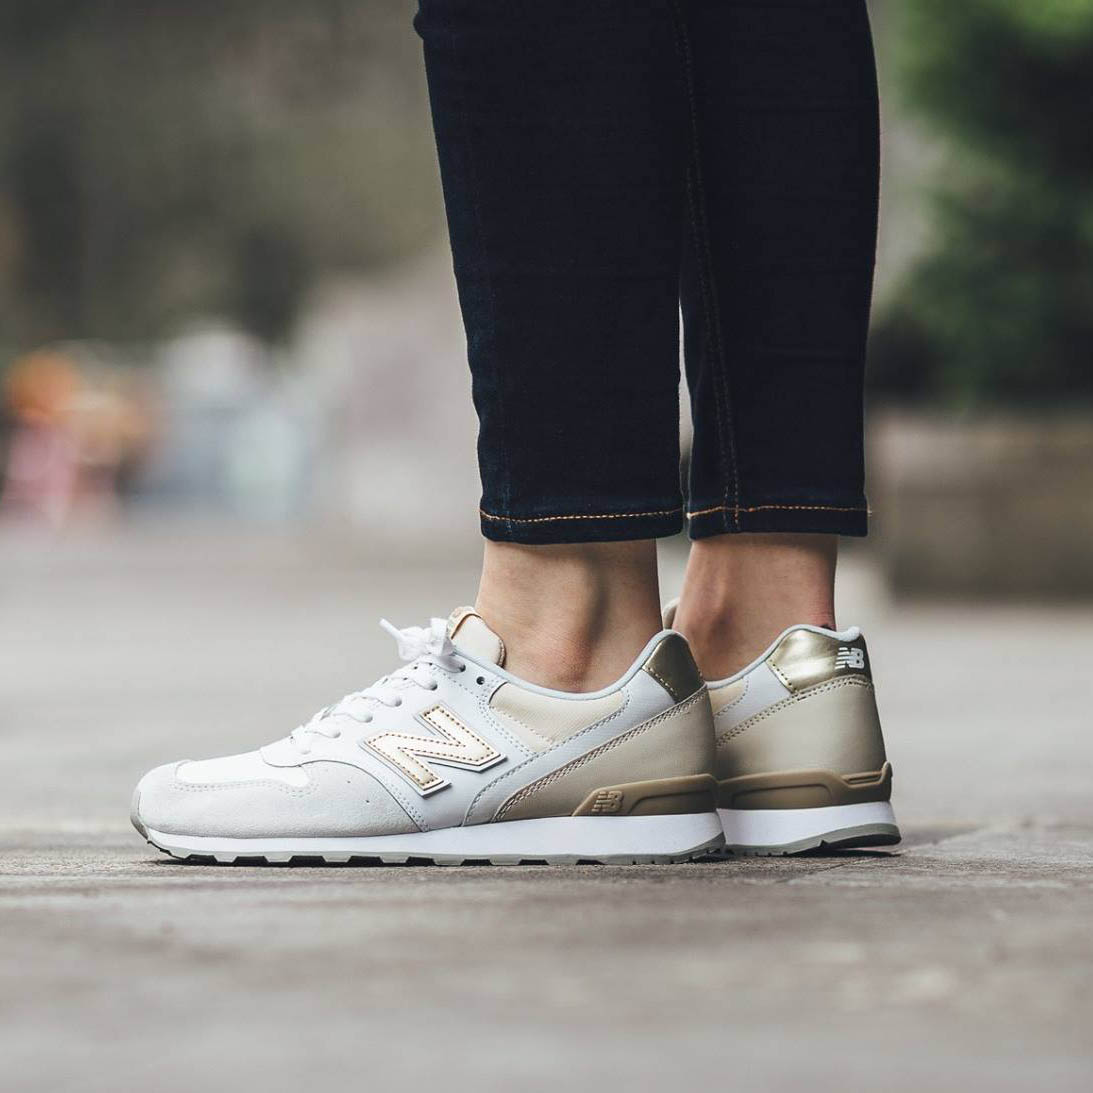 new balance 996 white and gold